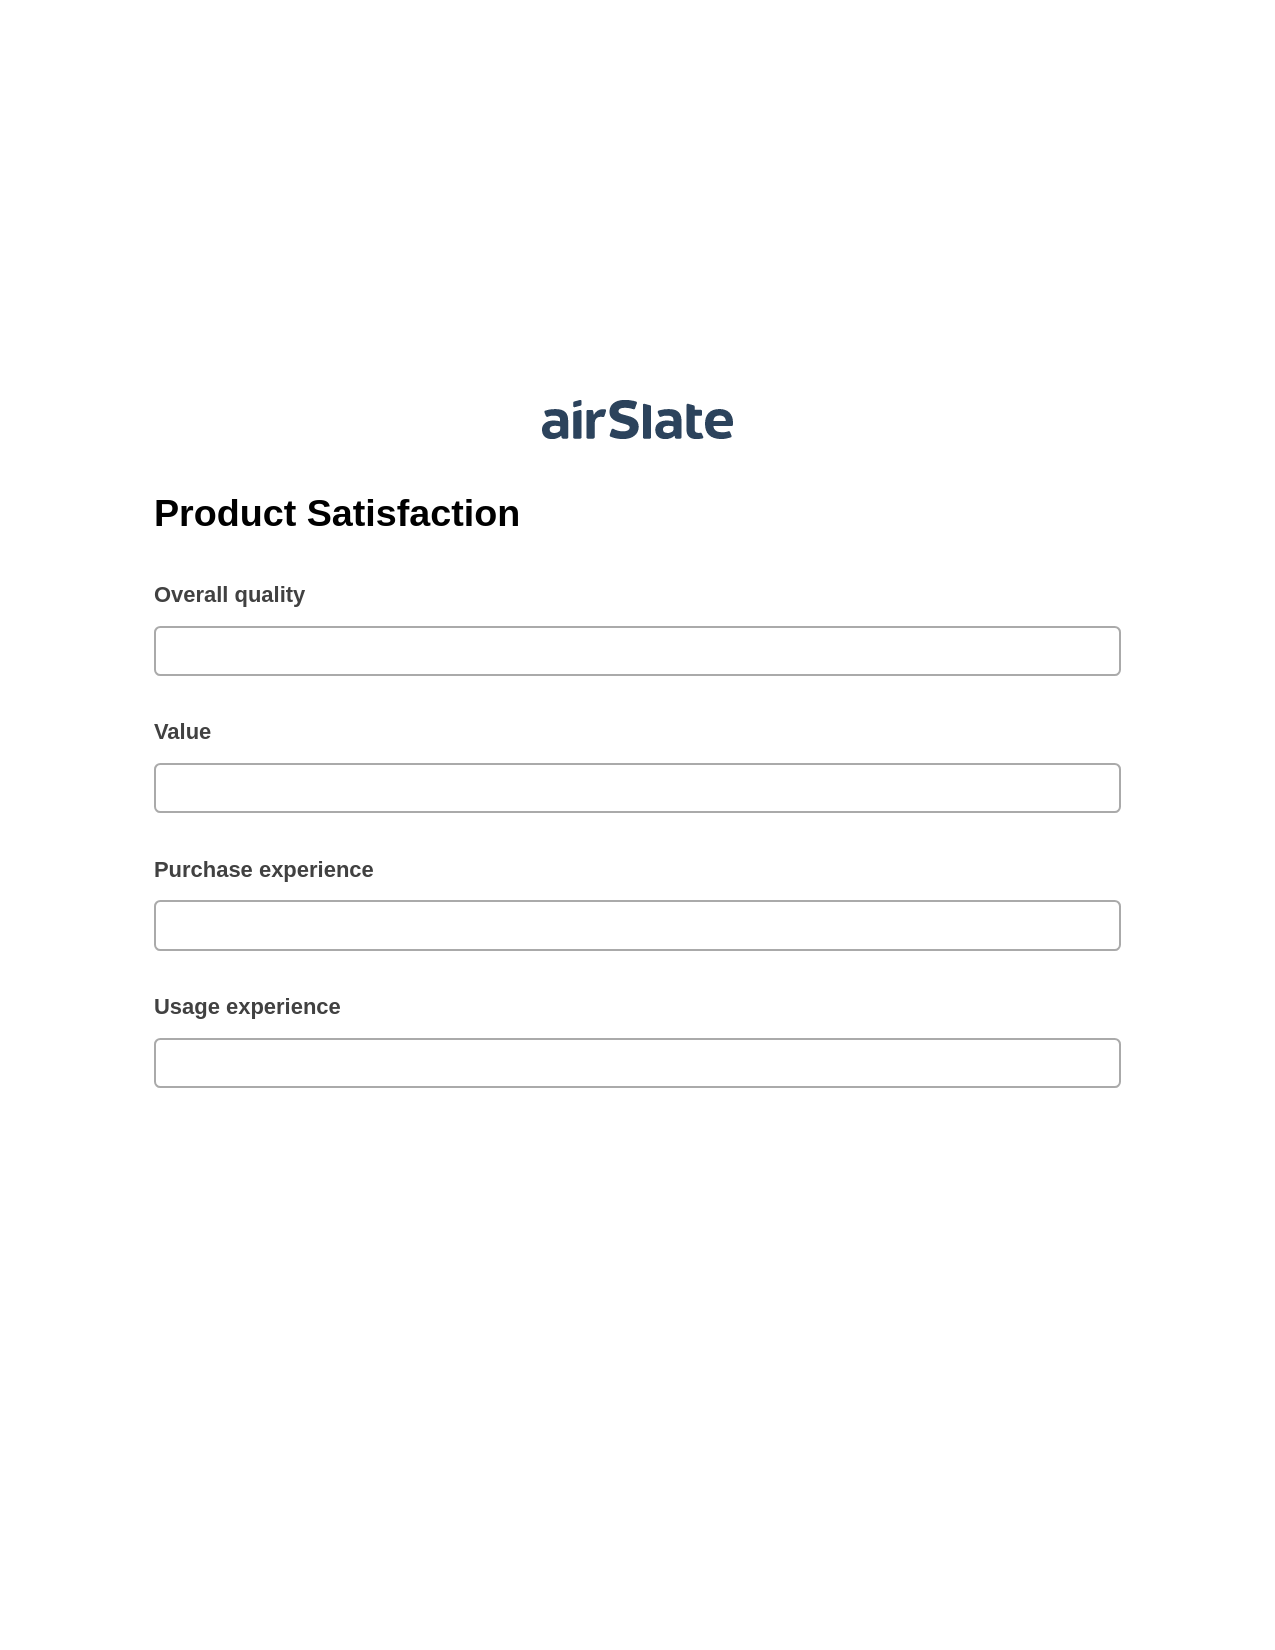 Product Satisfaction Pre-fill Slate from MS Dynamics 365 Records Bot, Send Mailchimp Campaign Bot, Google Drive Bot